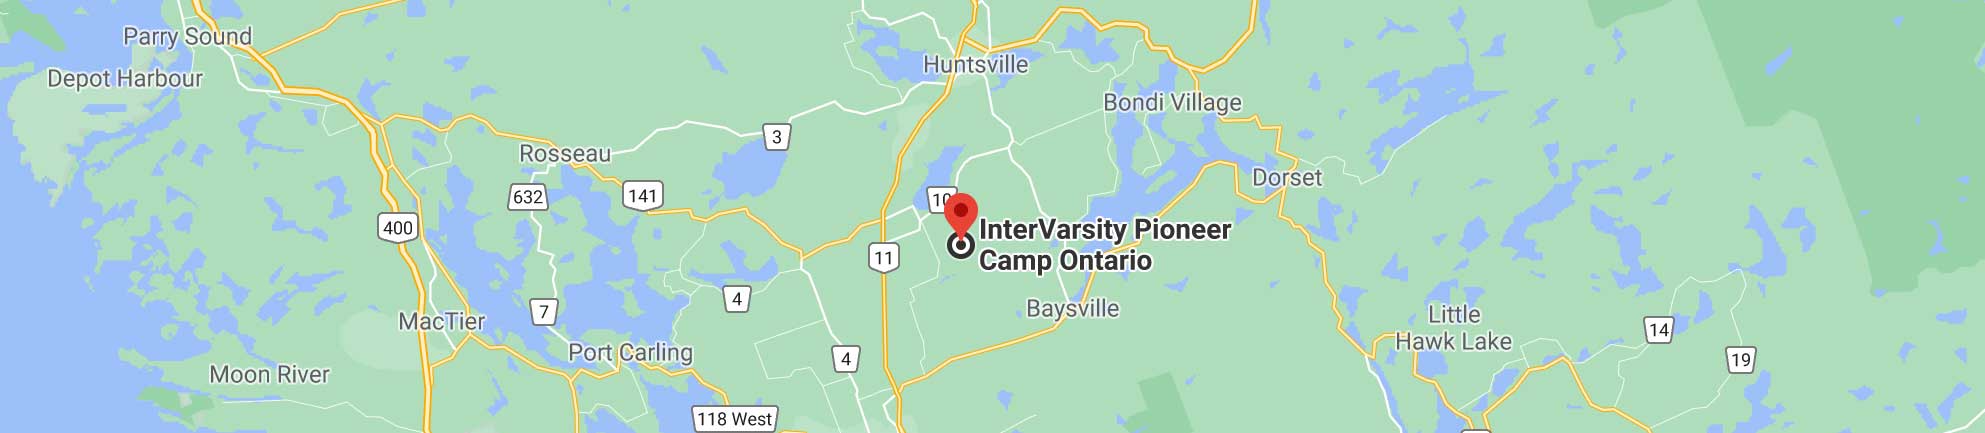 Pioneer Camp Ontario's location indicated on a map. Links to Google maps directions.